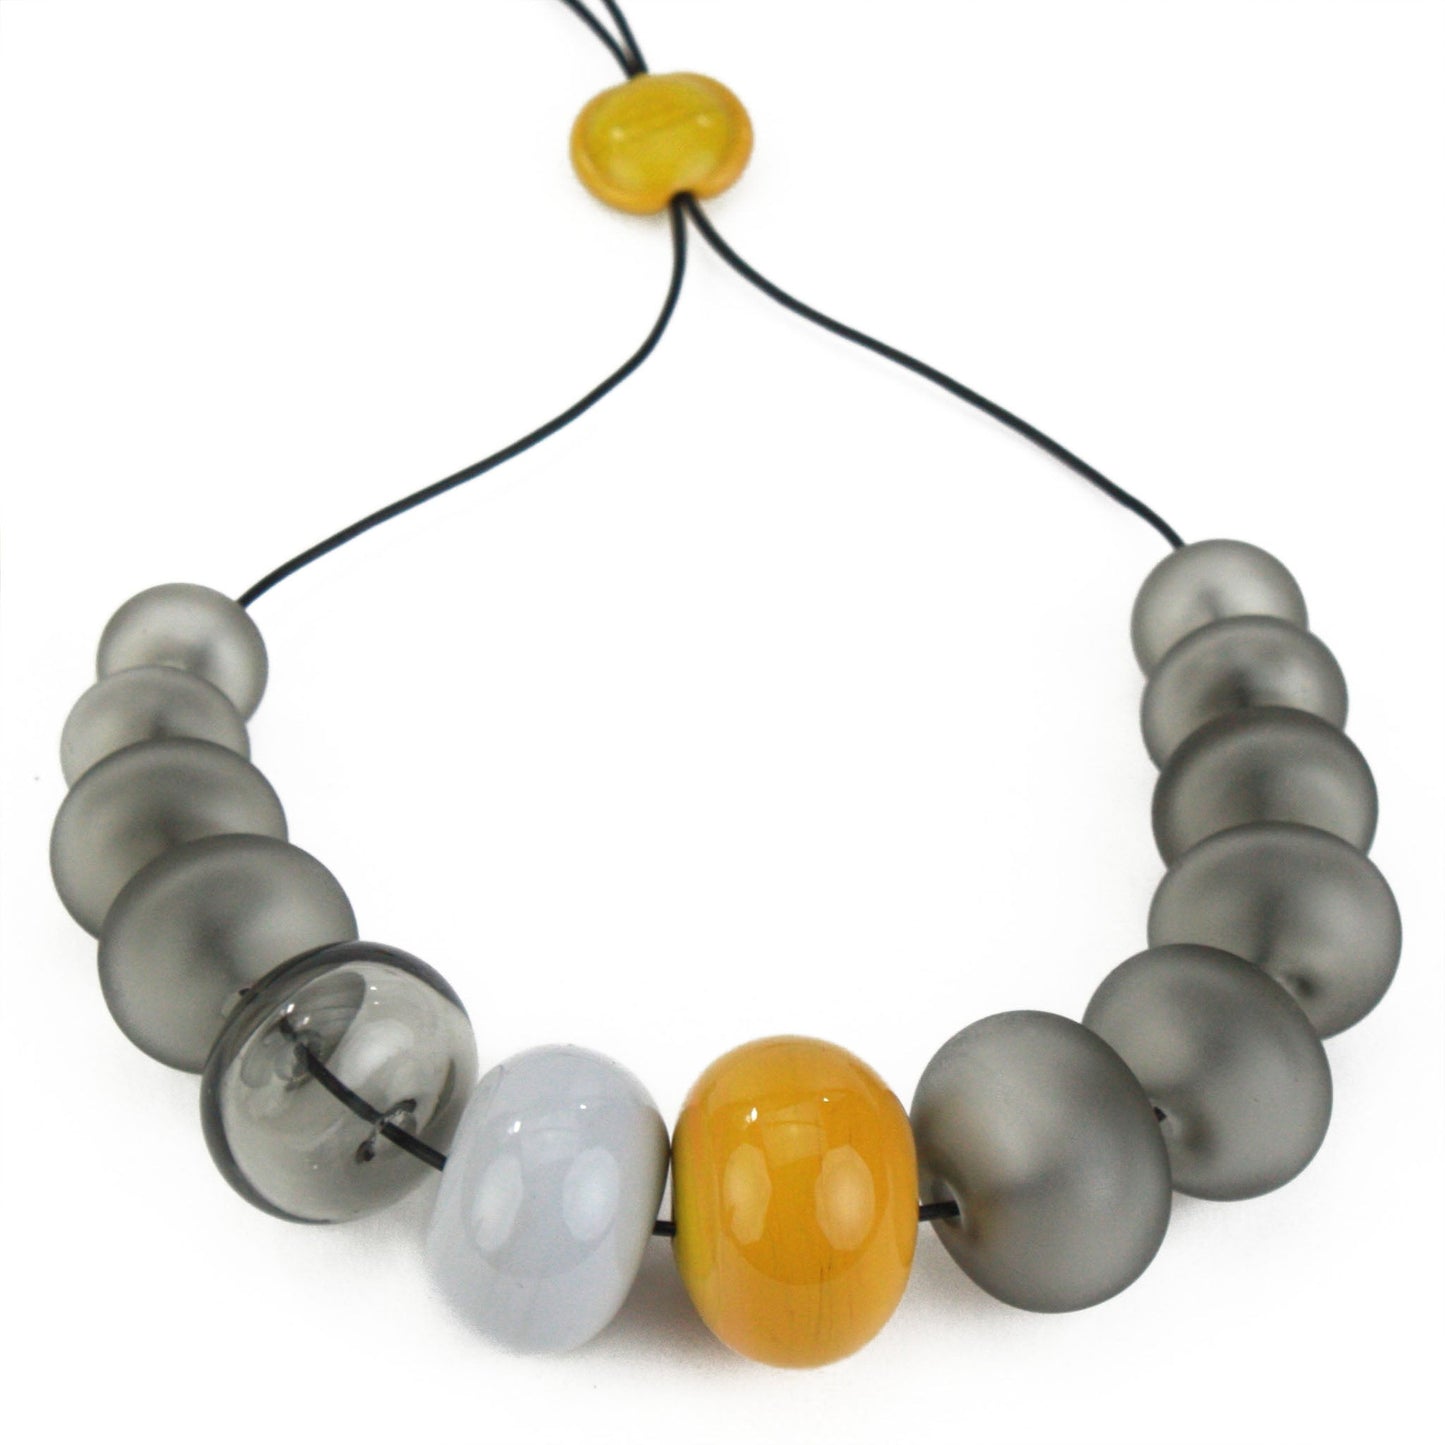 13 Bead Bubble Necklace -grey, yellow and dove grey